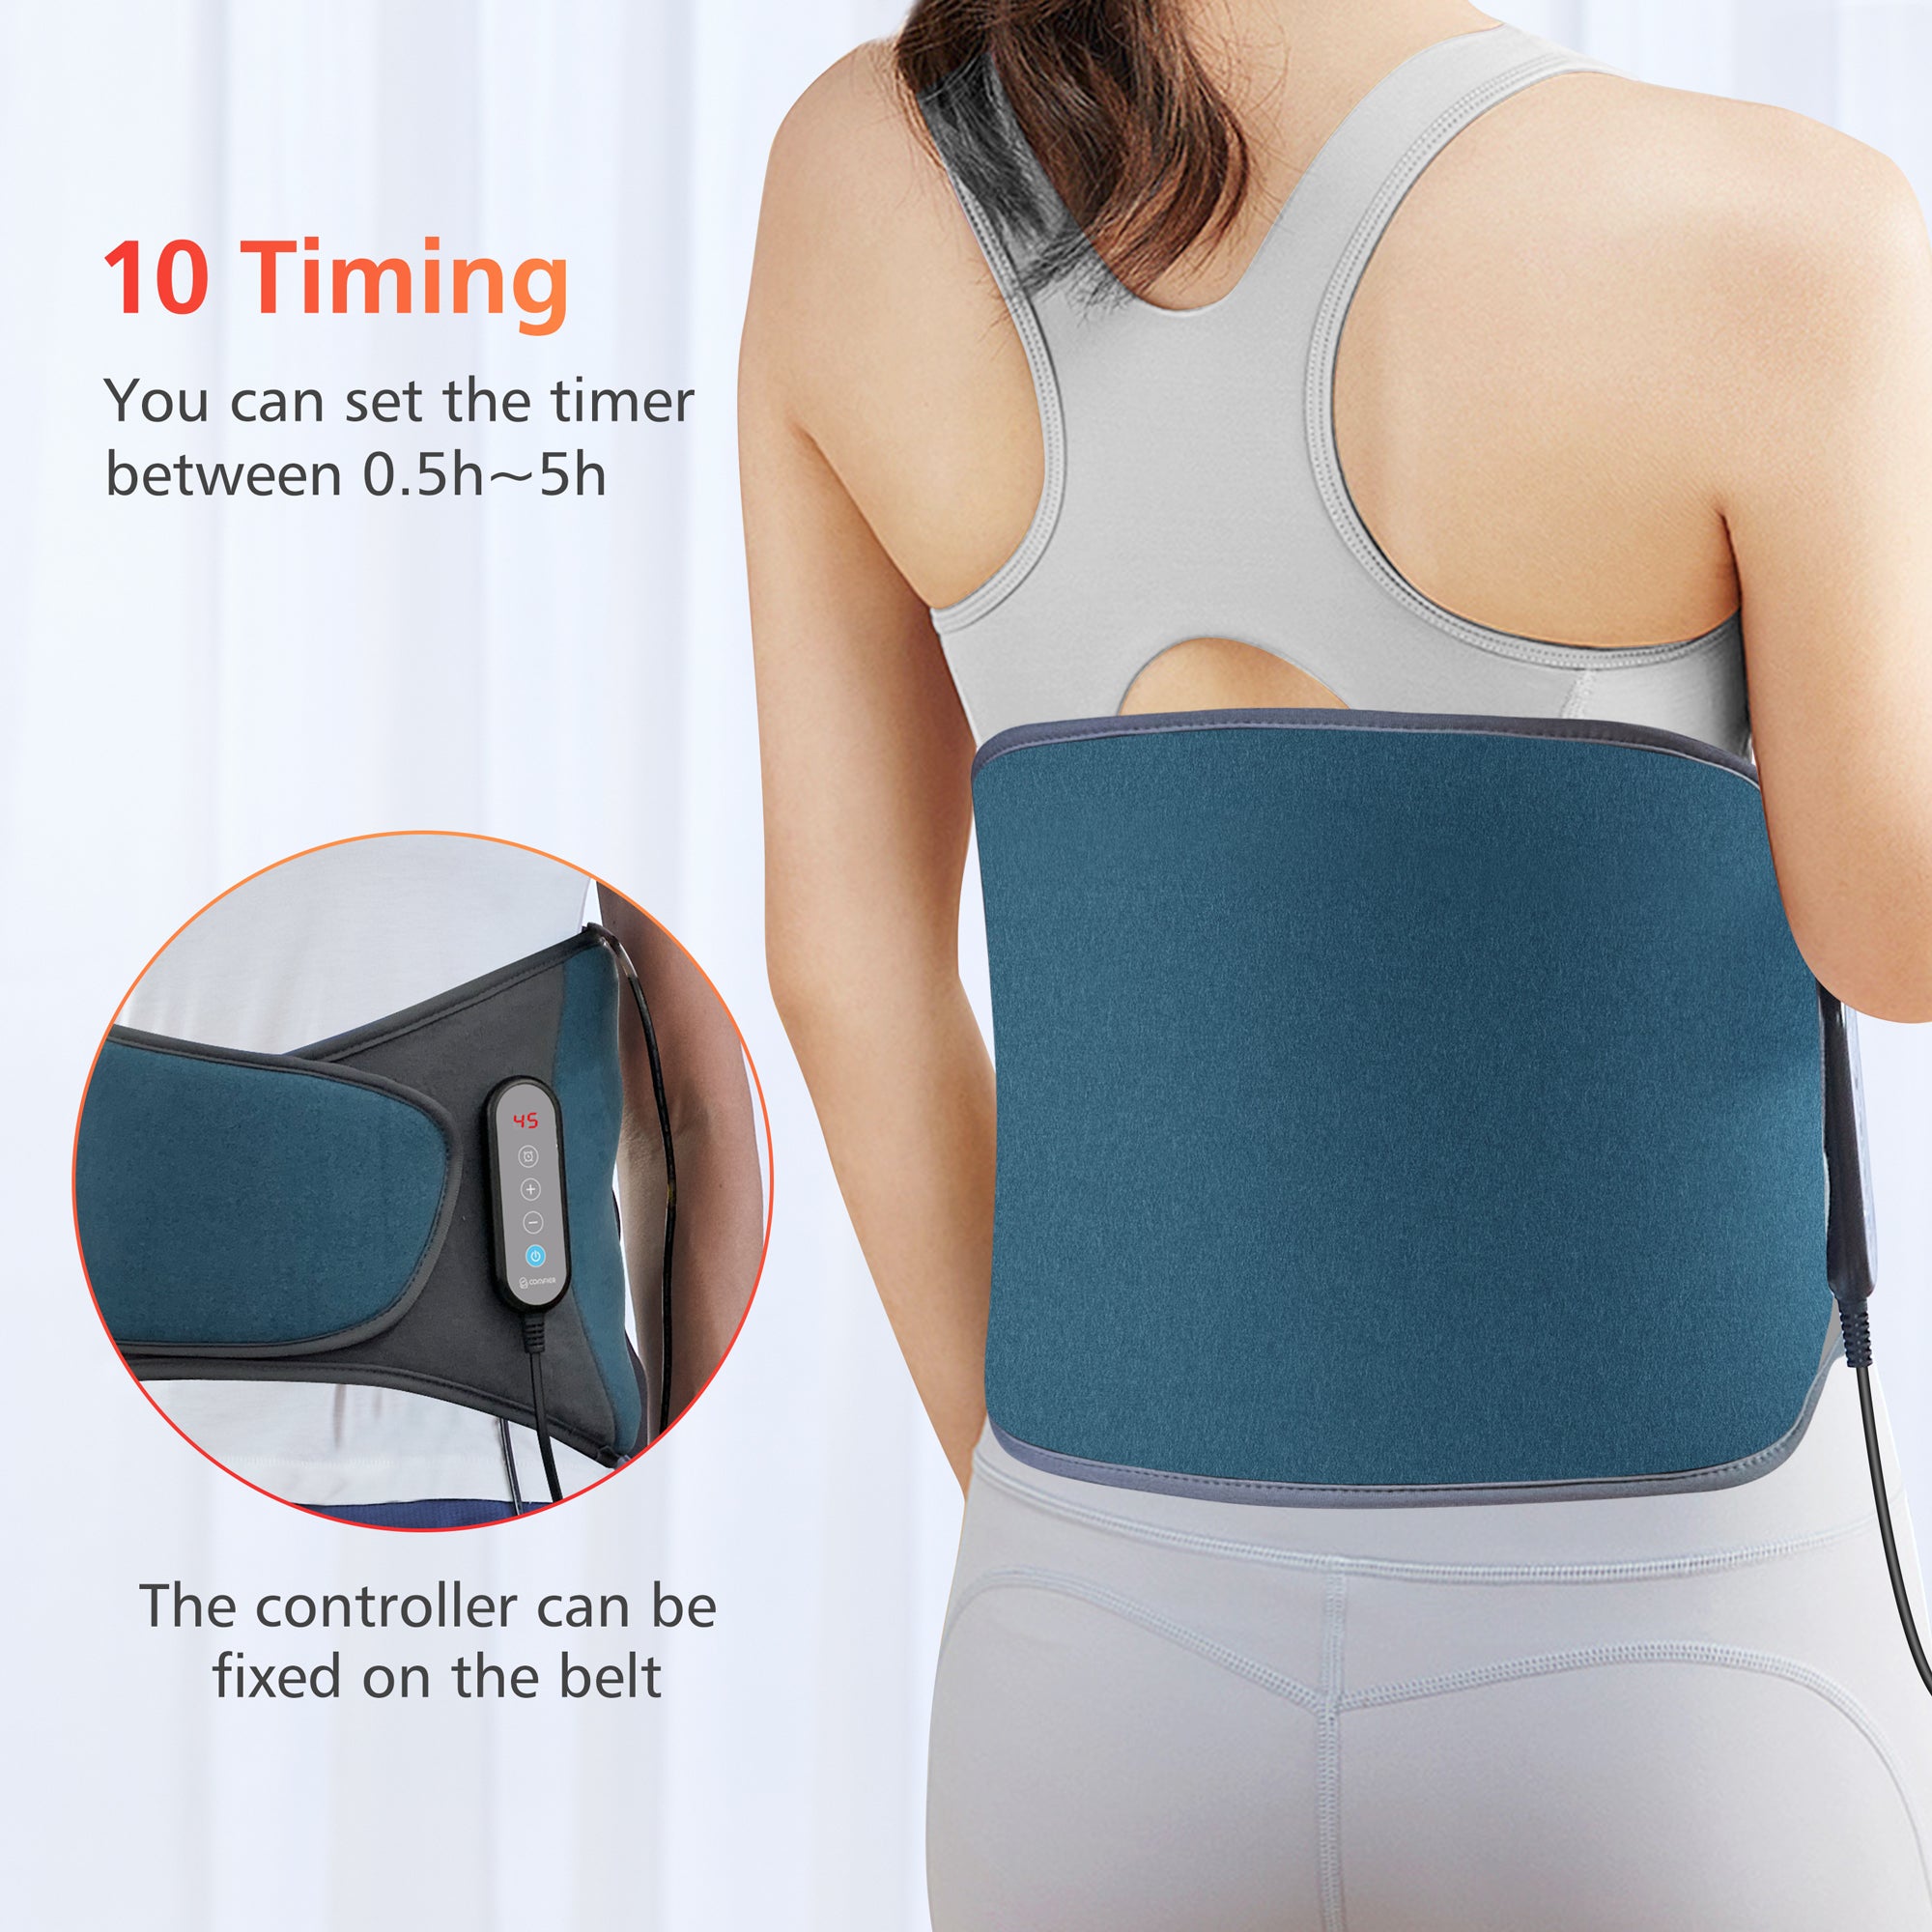 Comfier Heating Pad for Back Pain Relief, Waist Heated Wrap Belt,Fast Heating --CF-6211